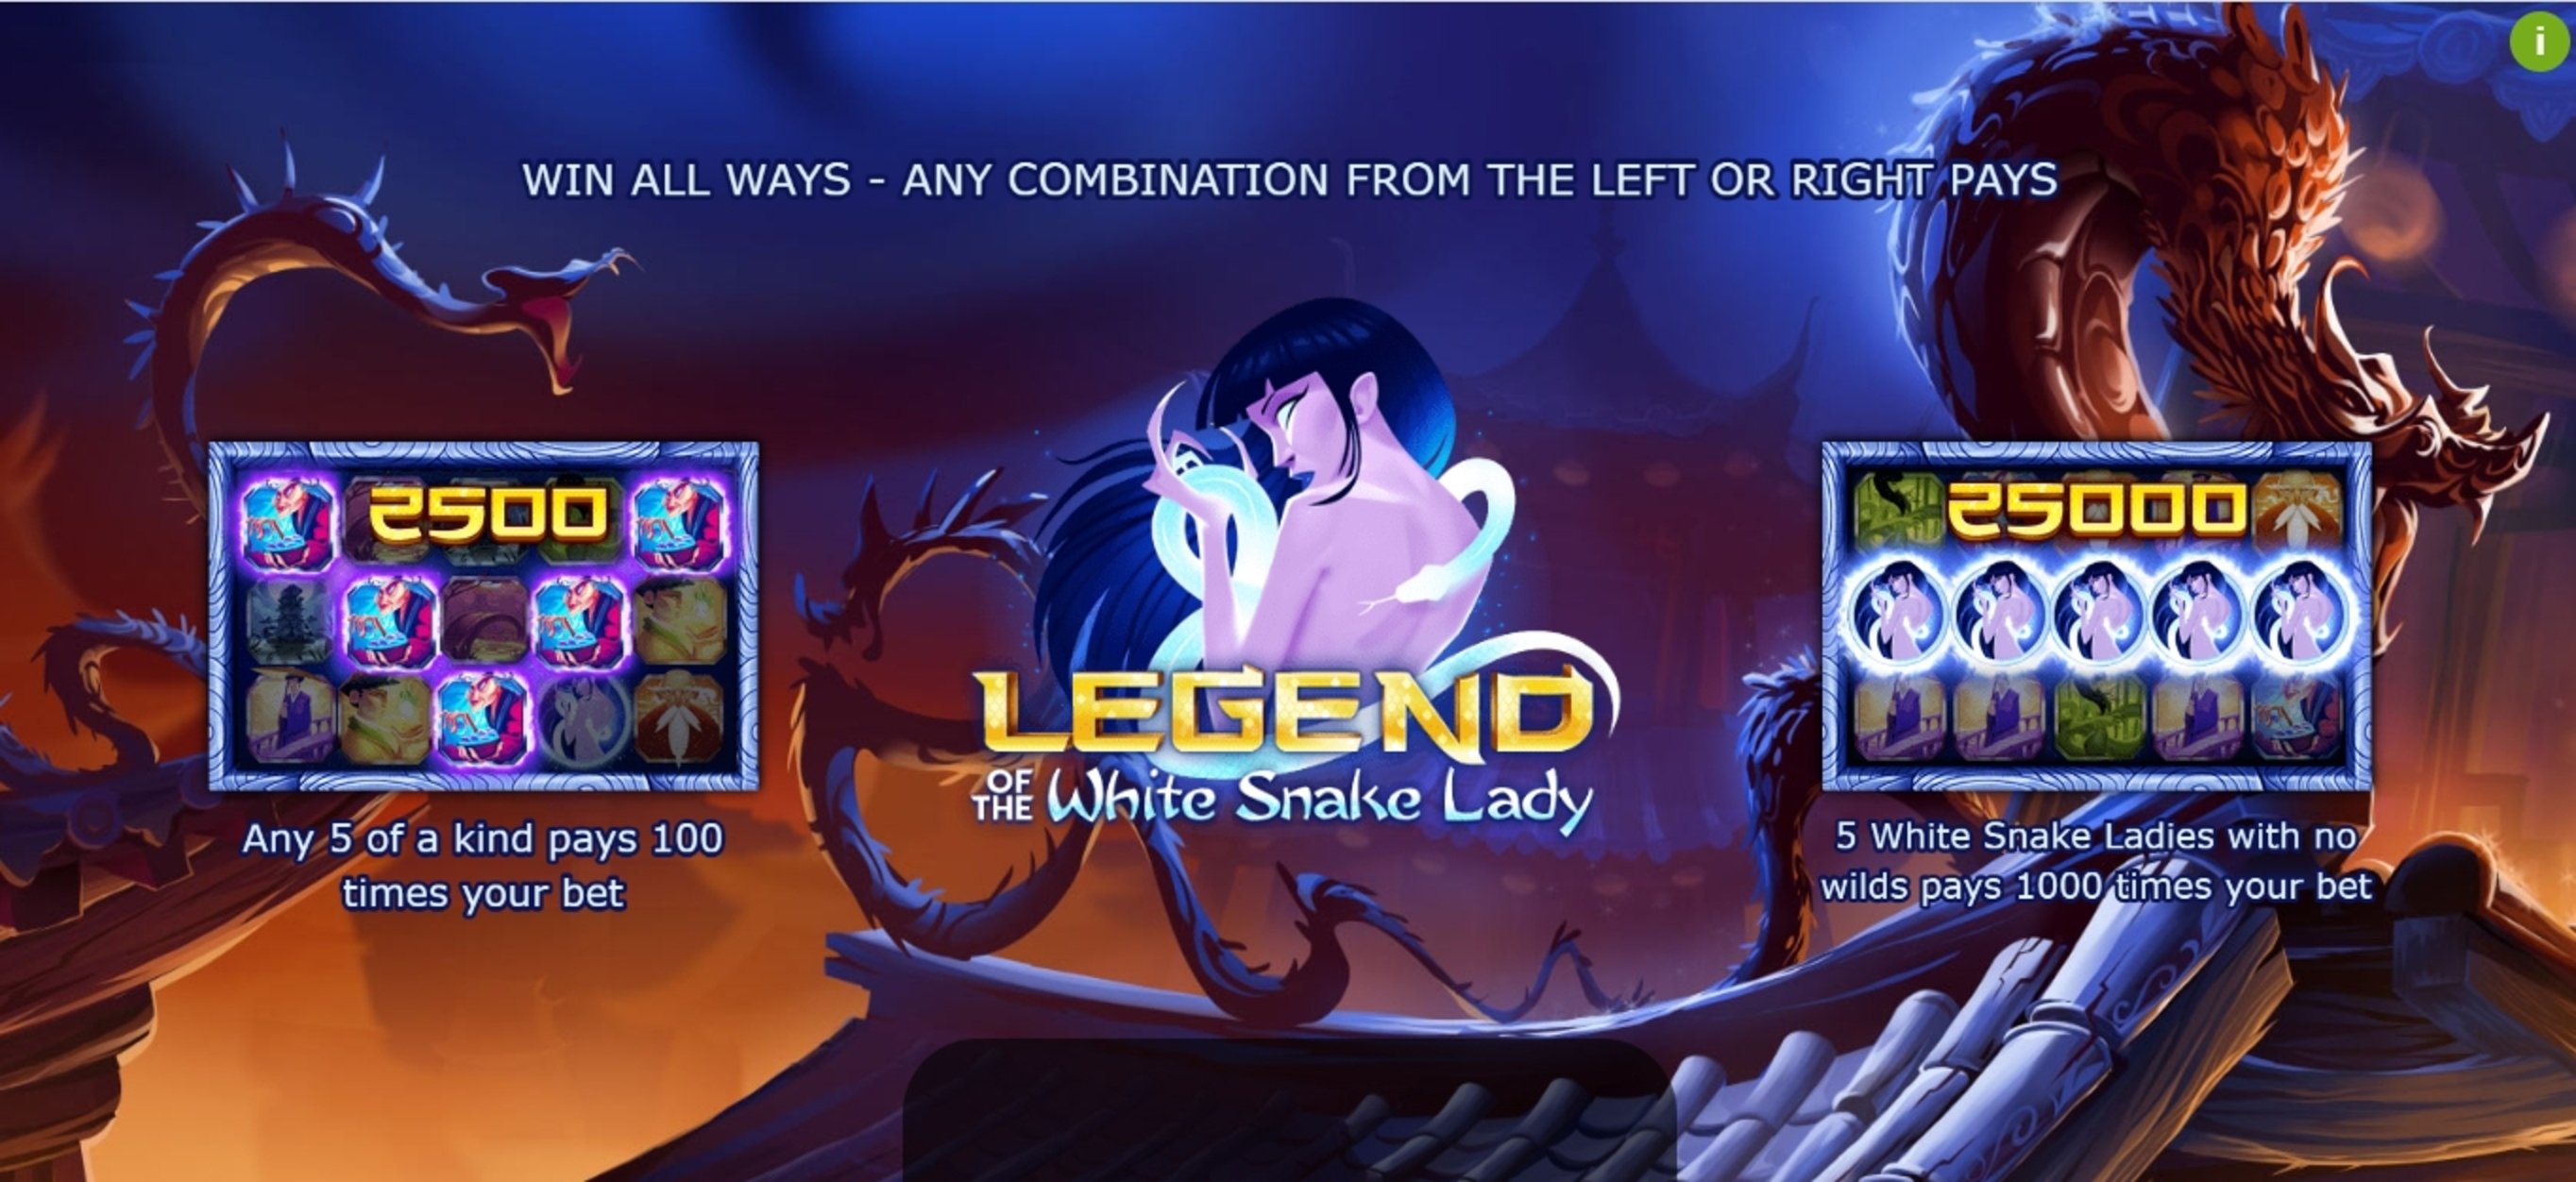 Play Legend of the White Snake Lady Free Casino Slot Game by Yggdrasil Gaming